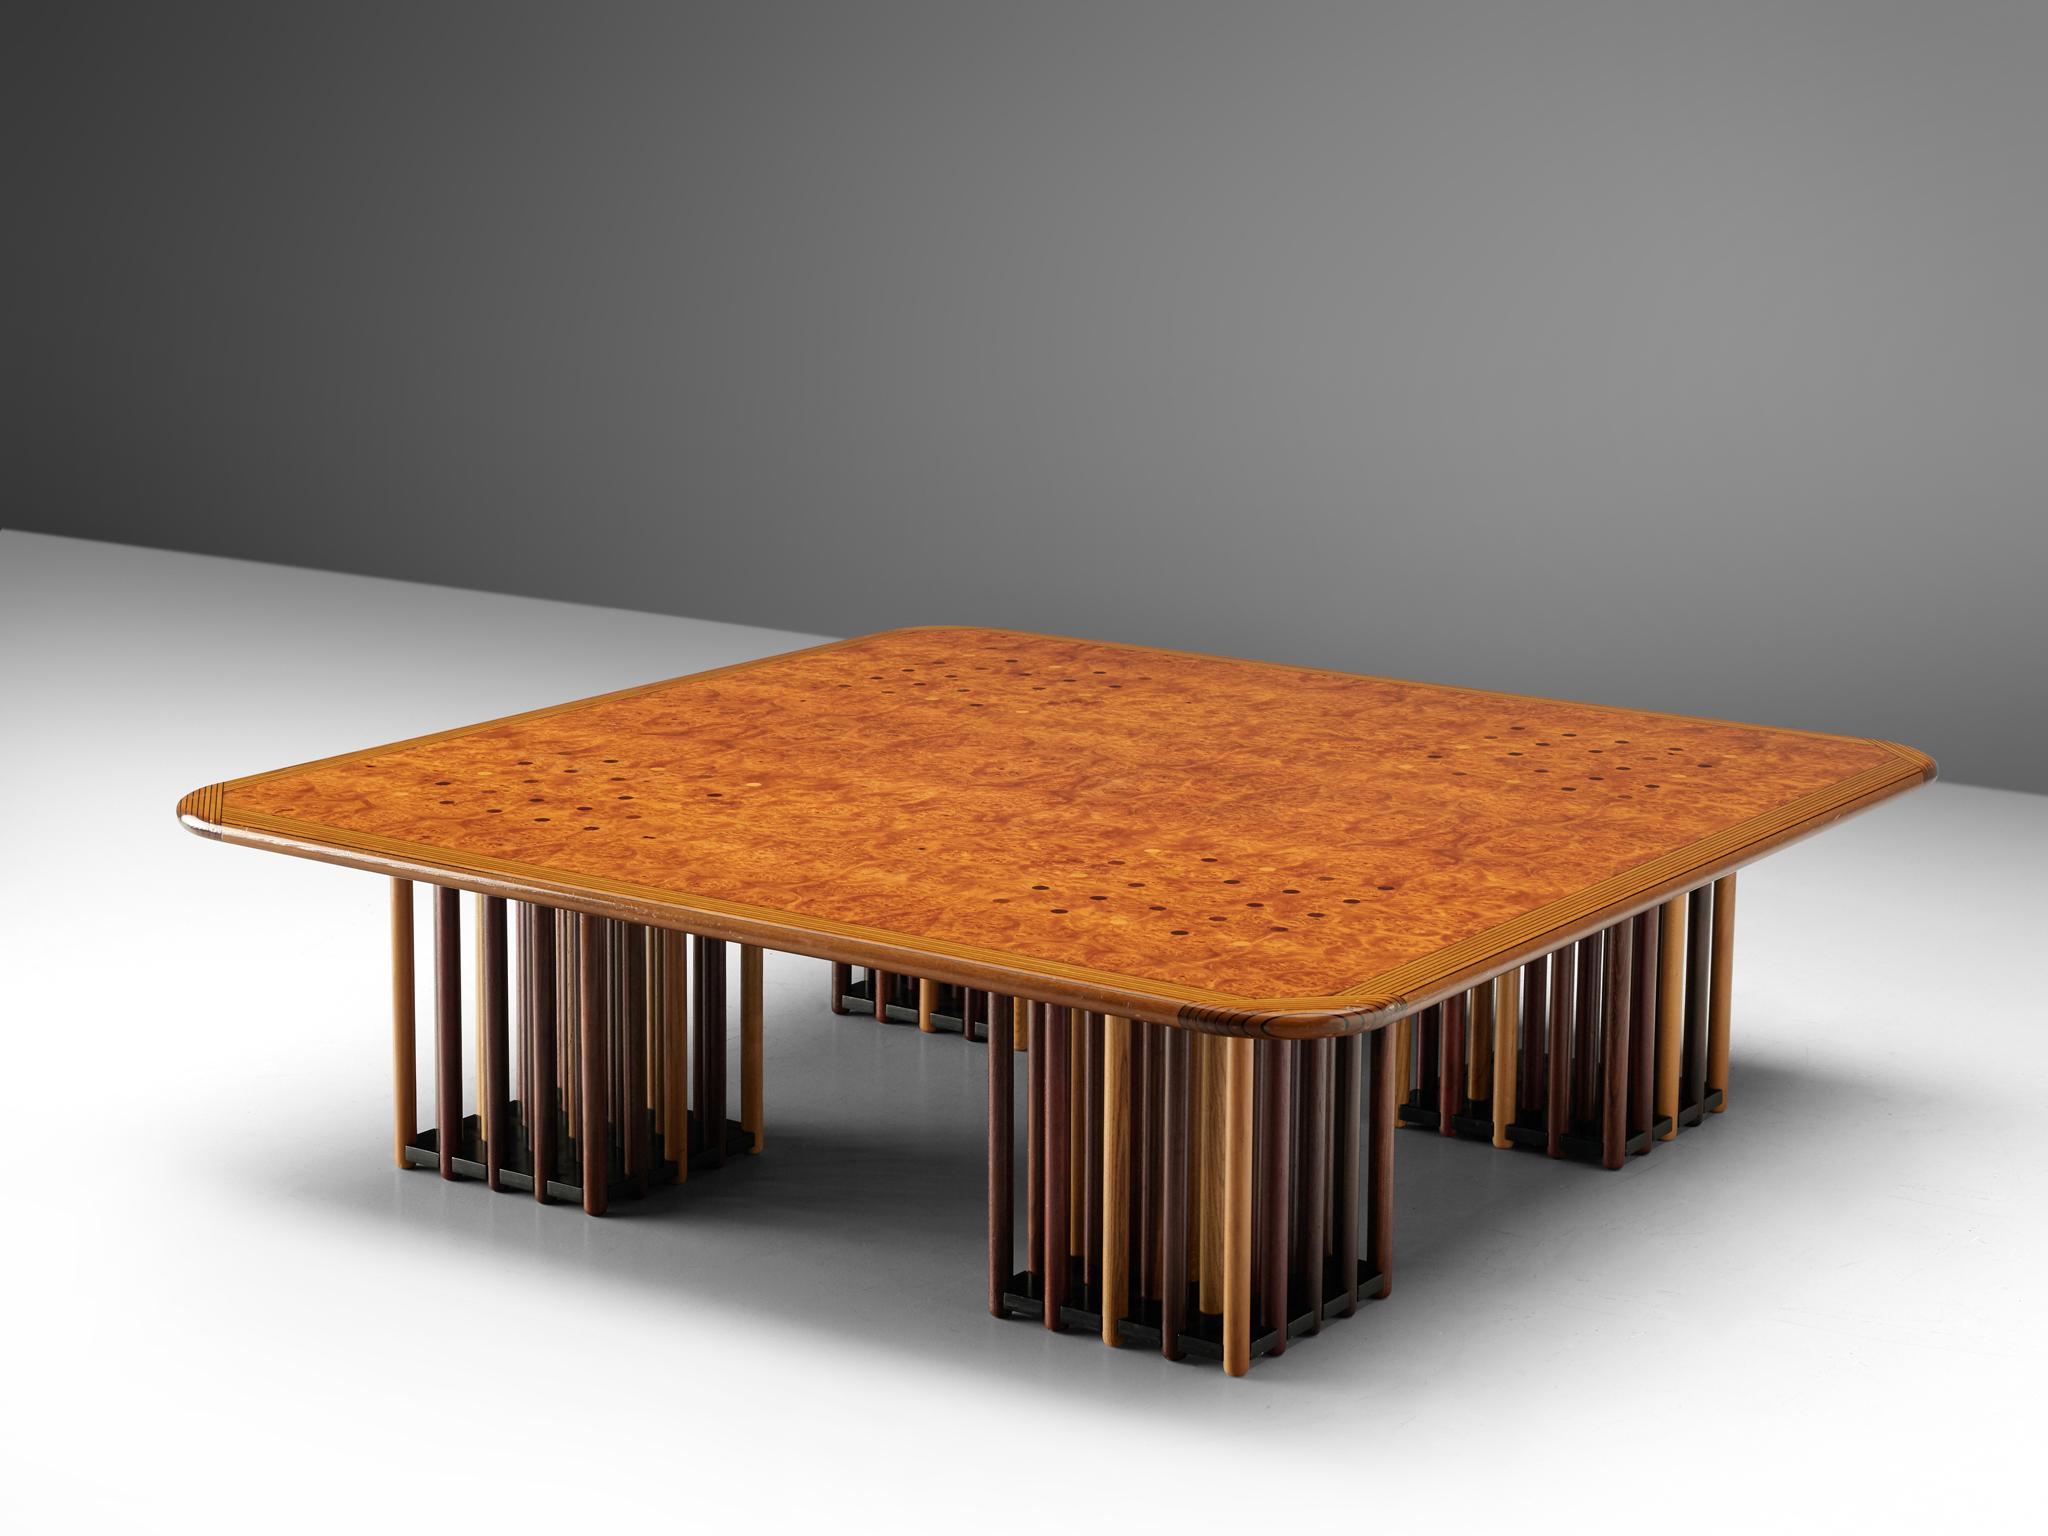 Coffee table by Afra Scarpa & Tobia Scarpa, maple, burl, birch, beech, oak, fruitwood, Italy, circa 1975.

This extraordinary square table features four feet that exist of circular rods made out of different types of wood. The ends of the circular